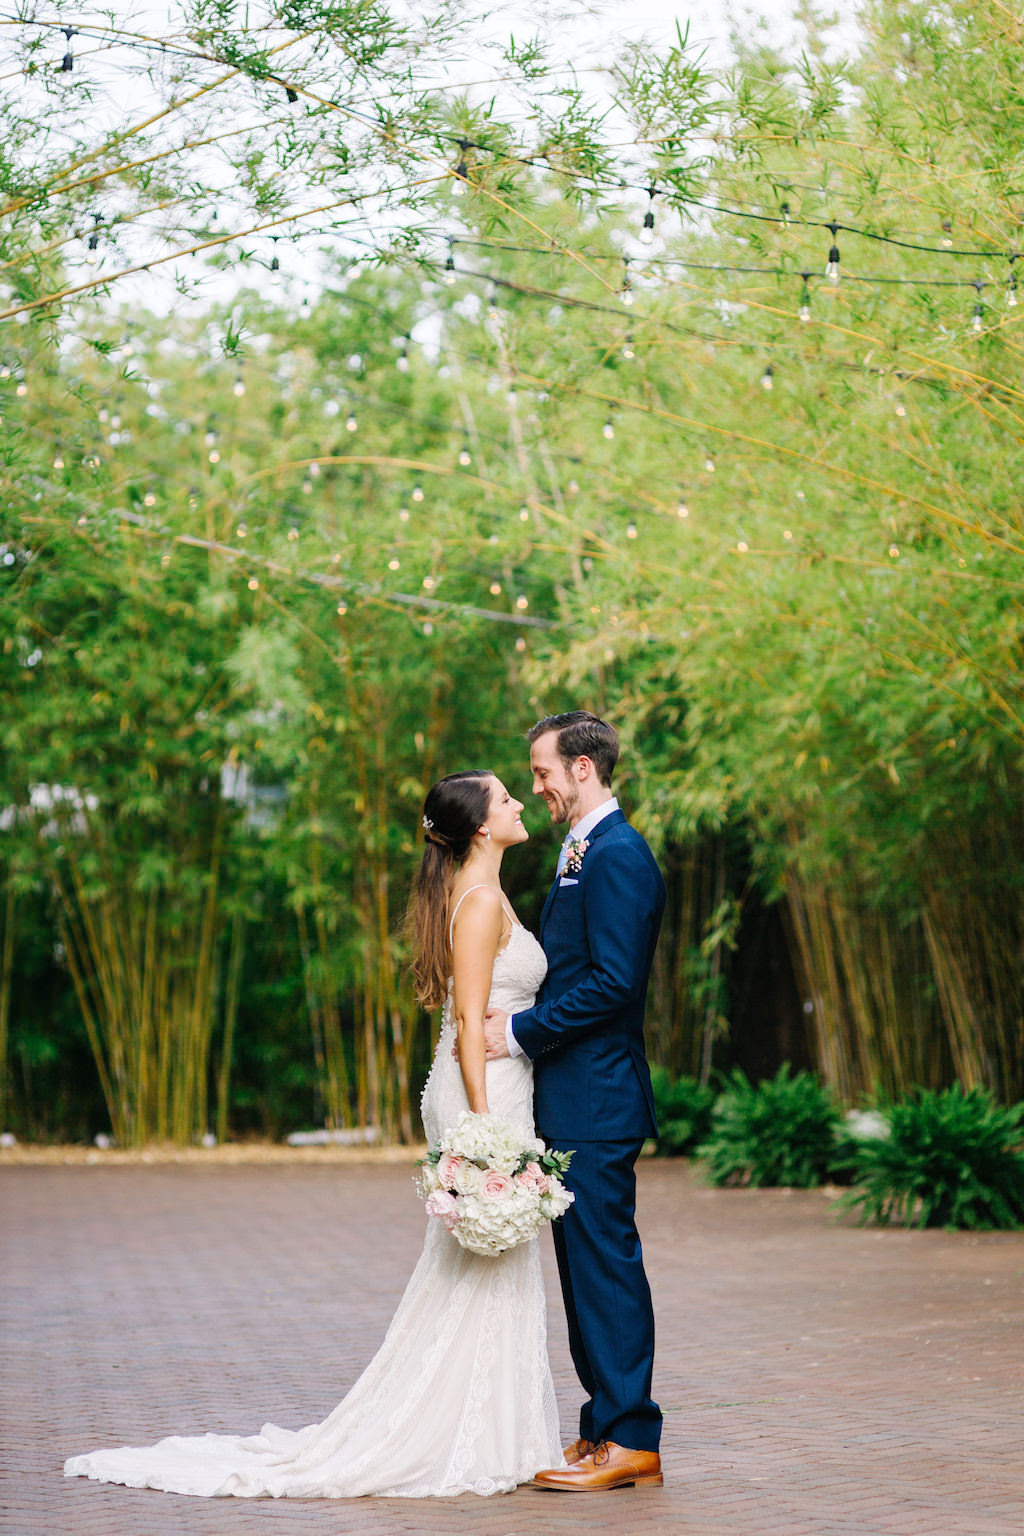 Modern, Florida Bride and Groom in Outdoor Bamboo Courtyard | Downtown St. Pete Unique Wedding Venue NOVA 535